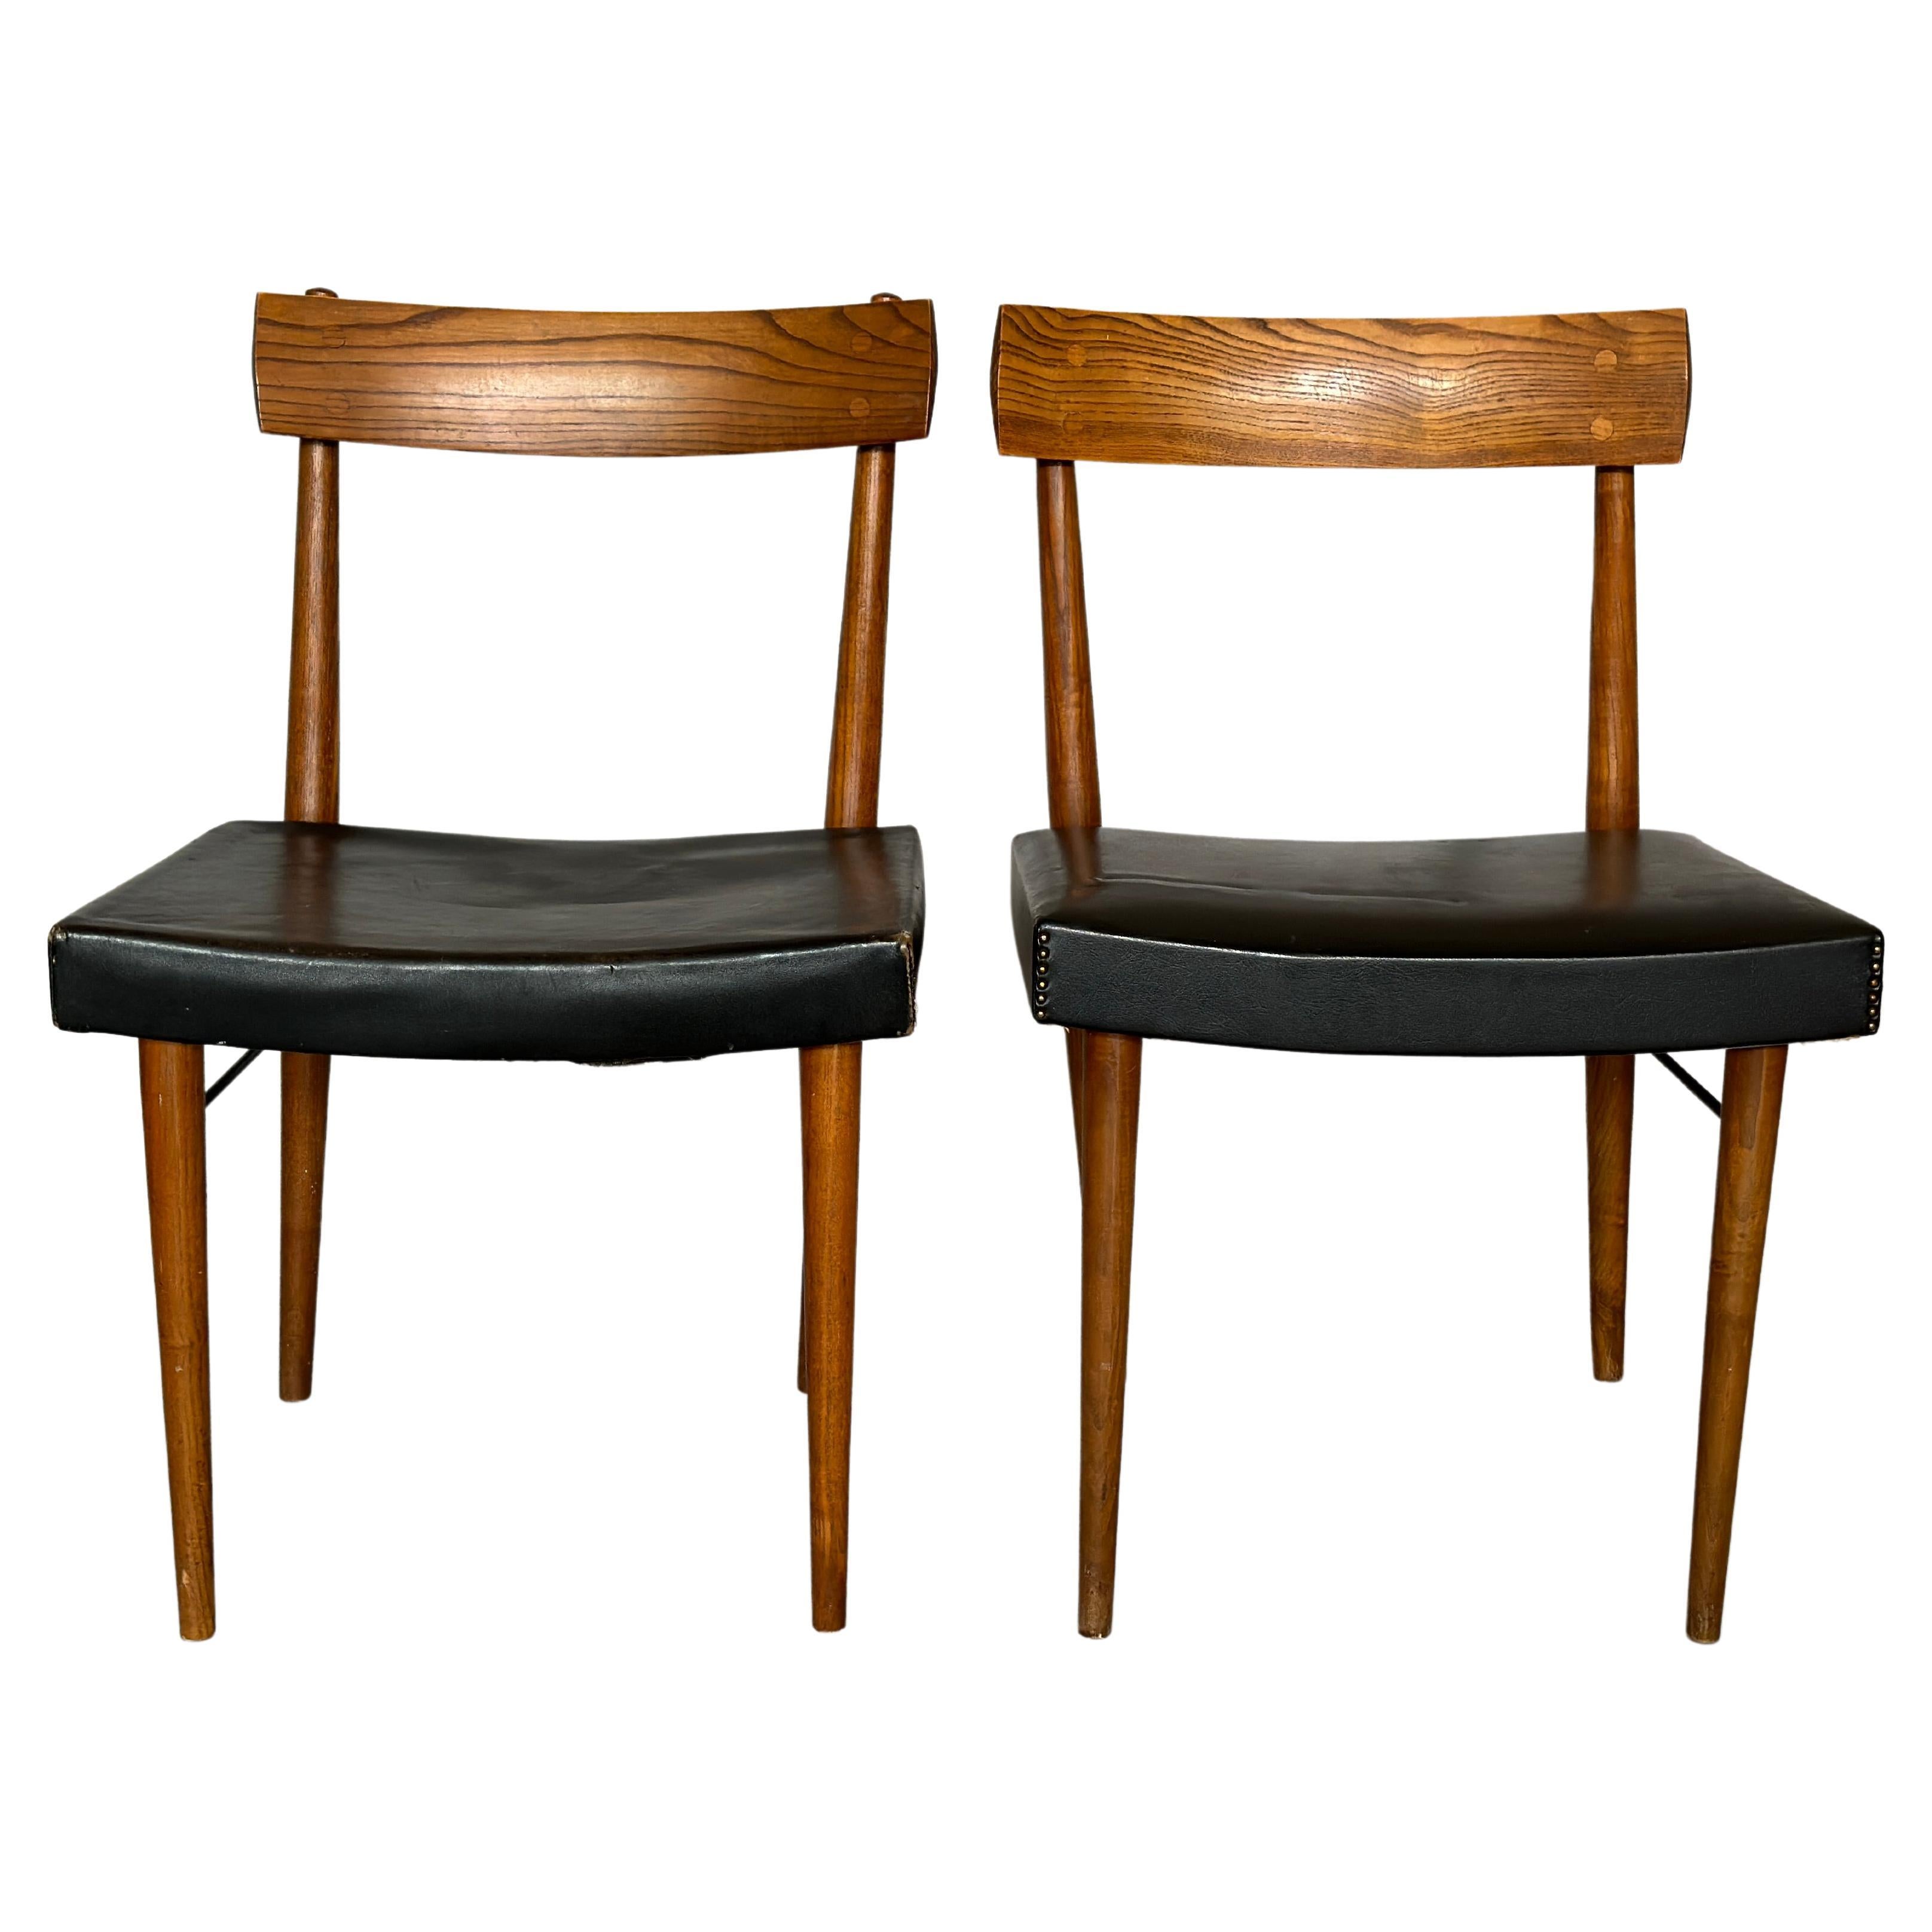 Danish Rosewood Dining Chairs, 1950s For Sale